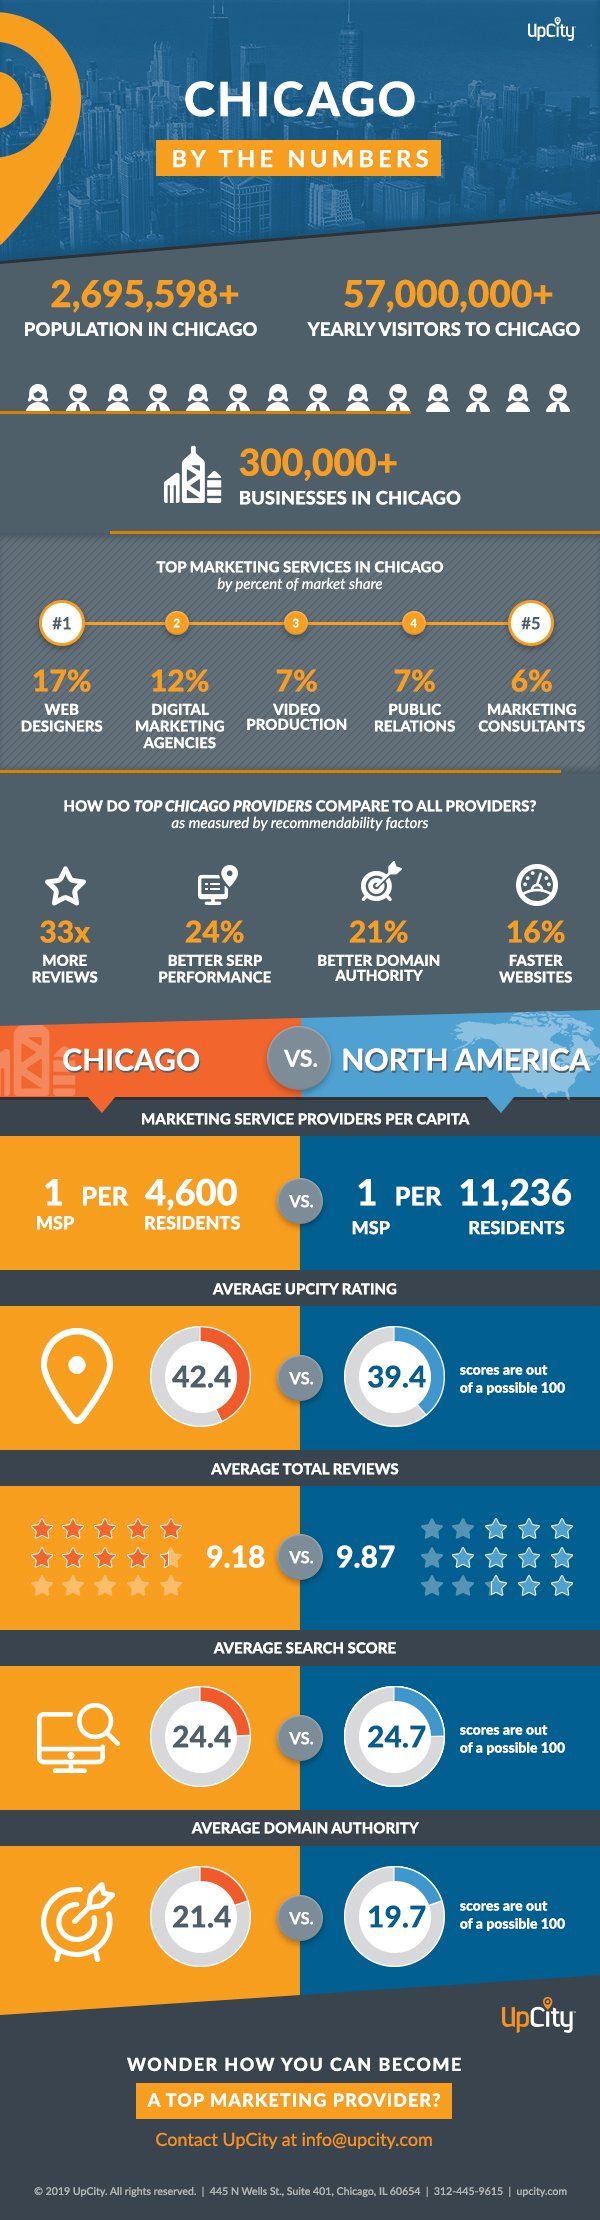 UpCity Chicago Excellence Awards Infographic